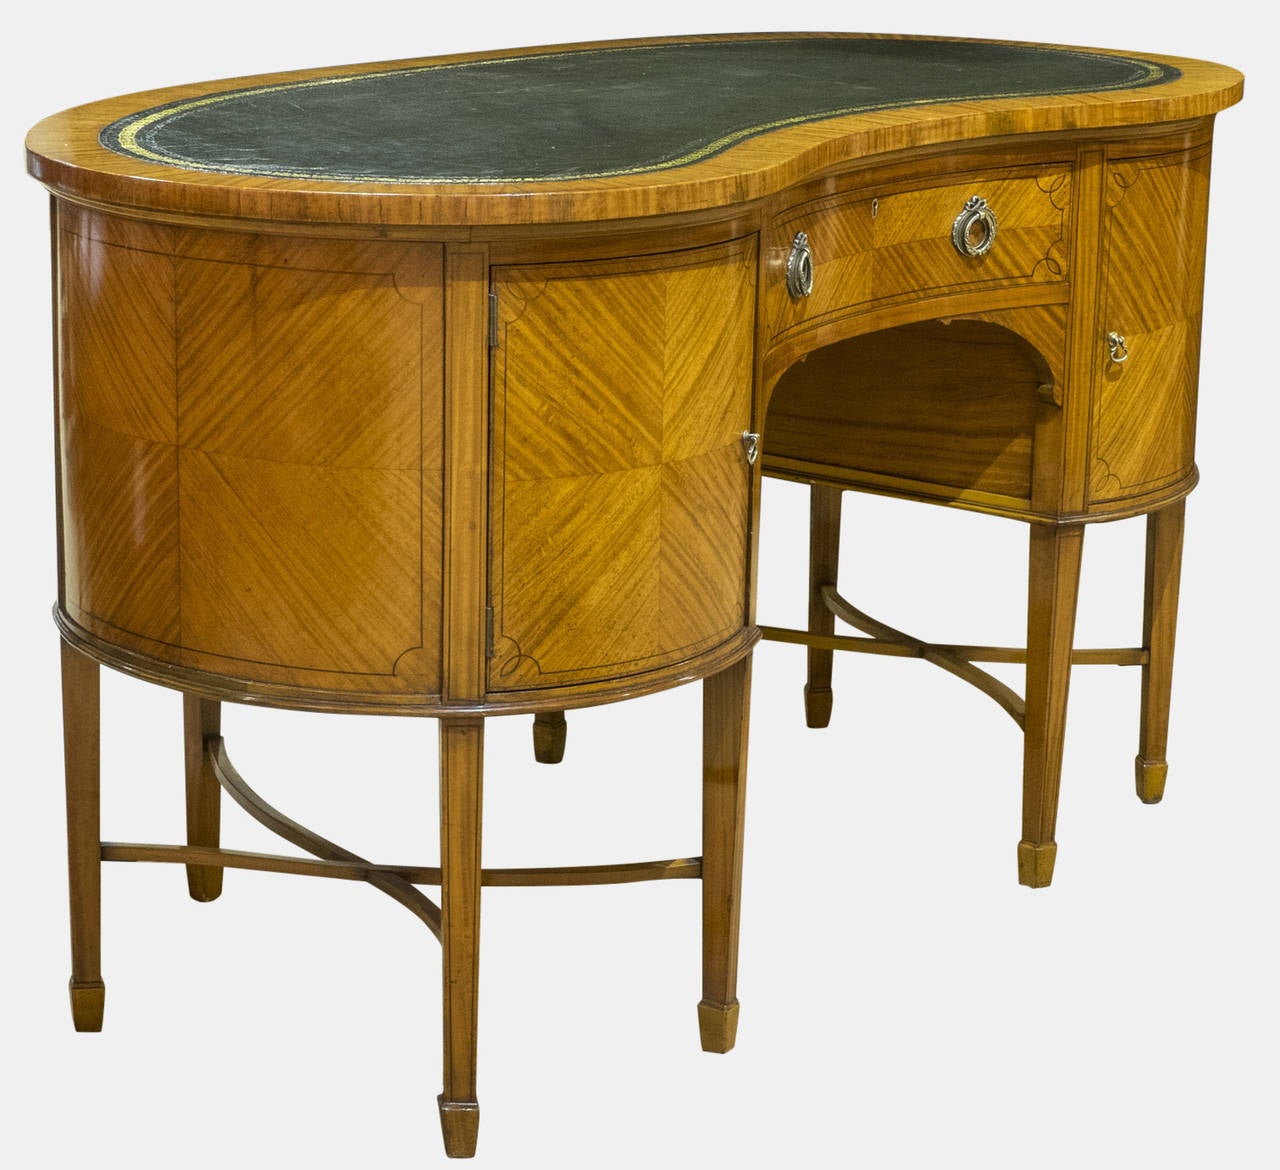 Late Victorian 19th Century Satinwood Kidney-Shaped Writing Desk